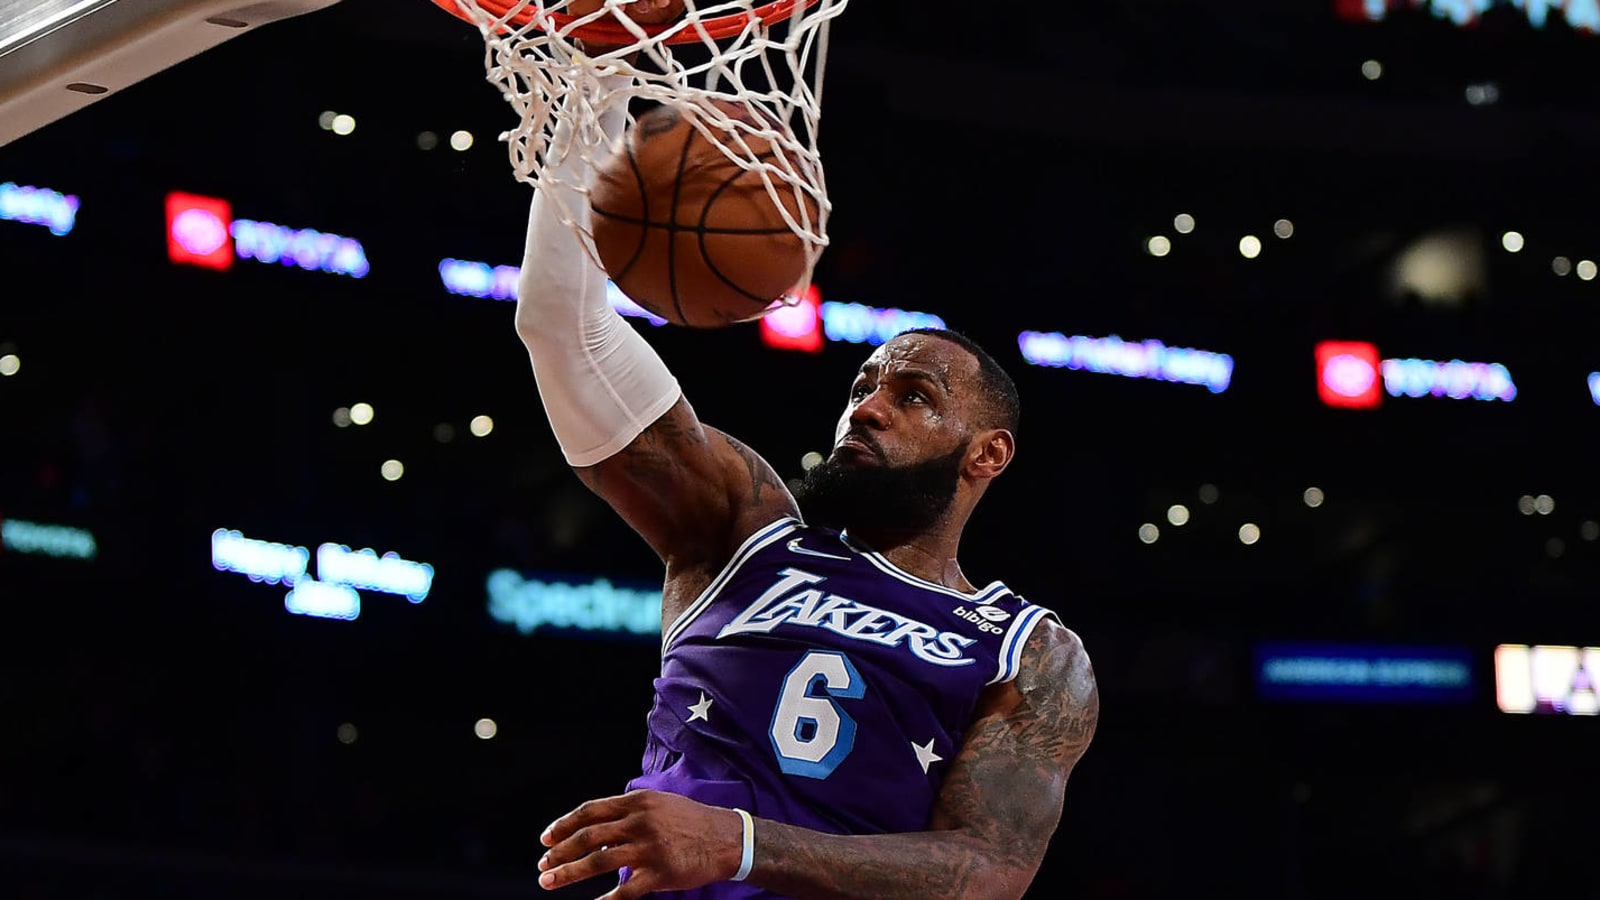 Lakers star LeBron James makes history in win over Hawks